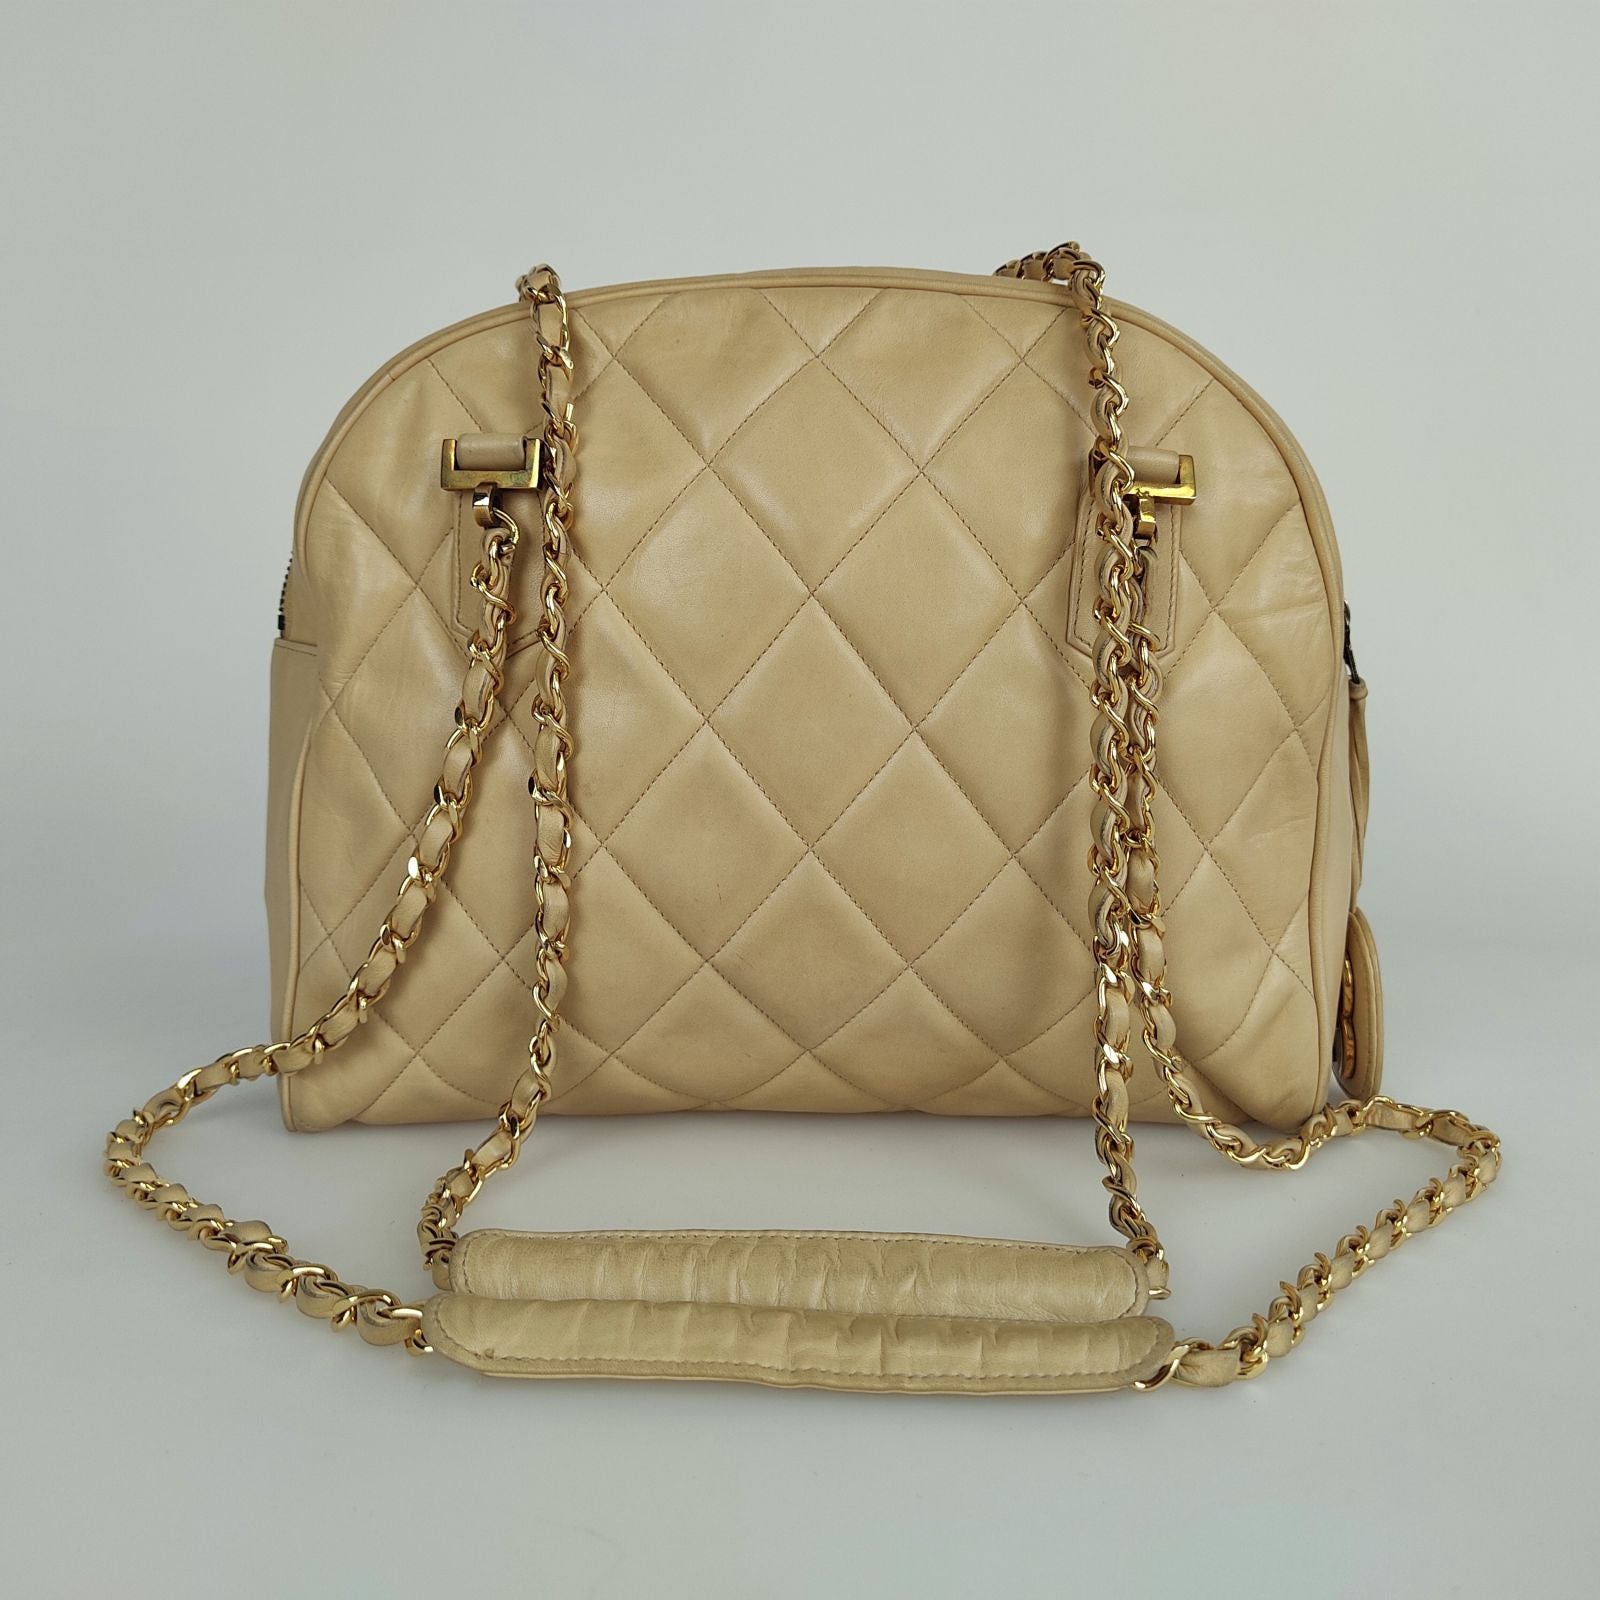 CHANEL shoulder bag in beige matelasse leather from the 80s